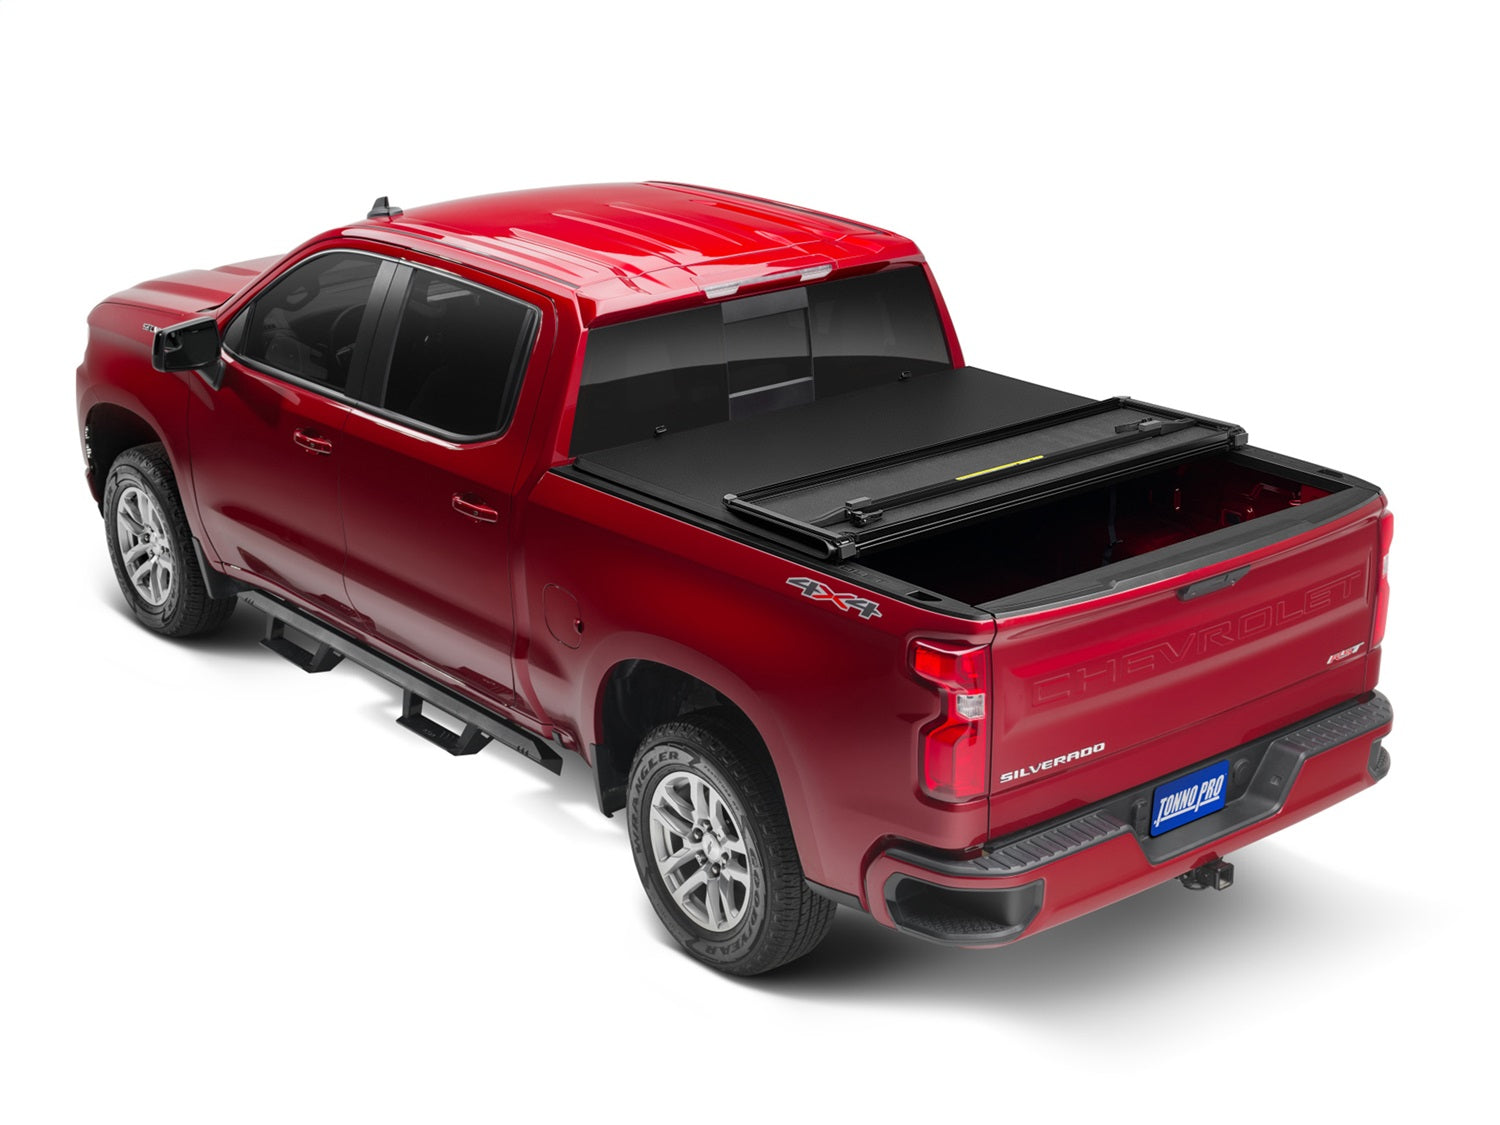 Tonno Pro HF-452 Tonno Pro Hard Fold Bed Cover Fits 04-21 Equator Frontier